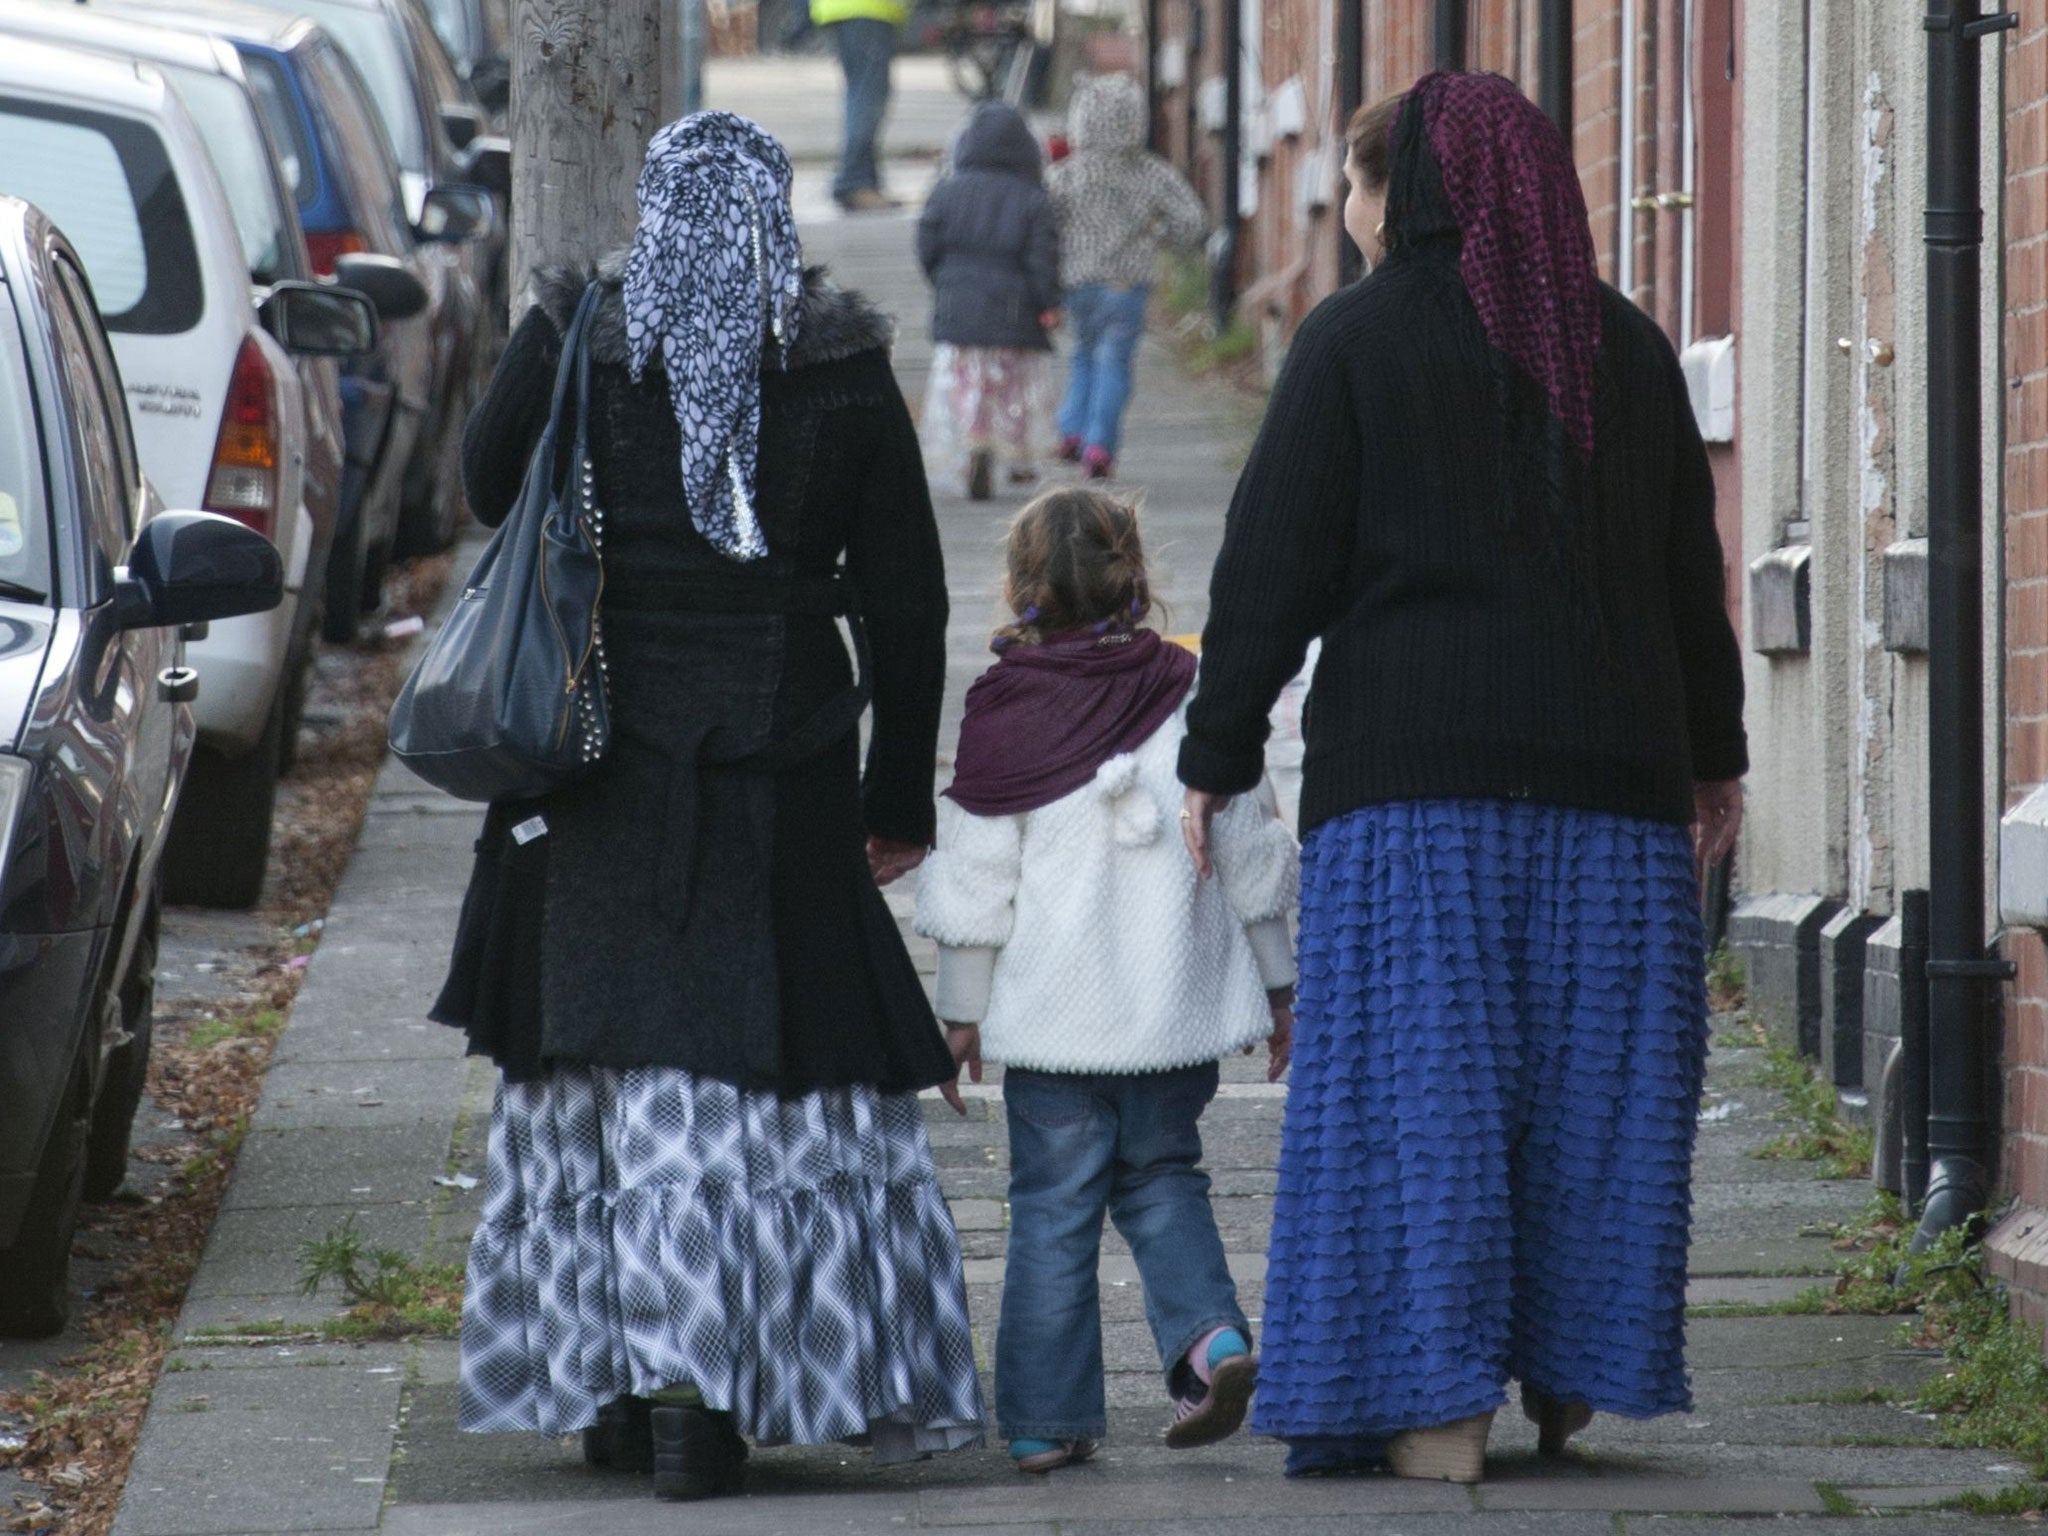 The residents of Rotherham